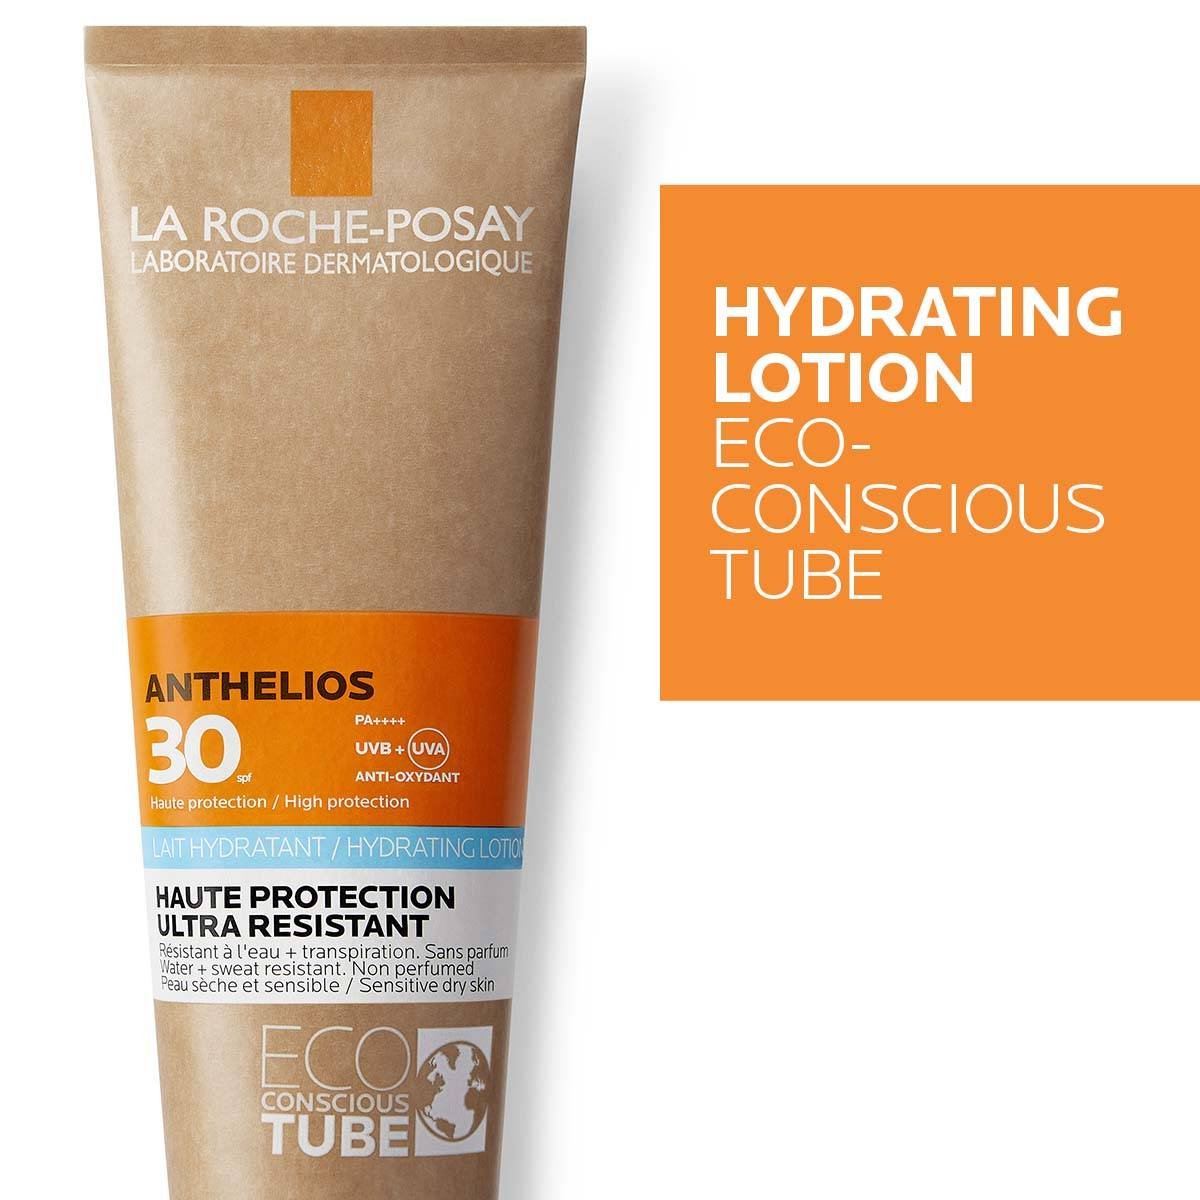 ANTHELIOS ECO-CONSCIOUS HYDRATING LOTION SPF30 ΑΝΤΗΛΙΑΚΟ ΣΩΜΑΤΟΣ